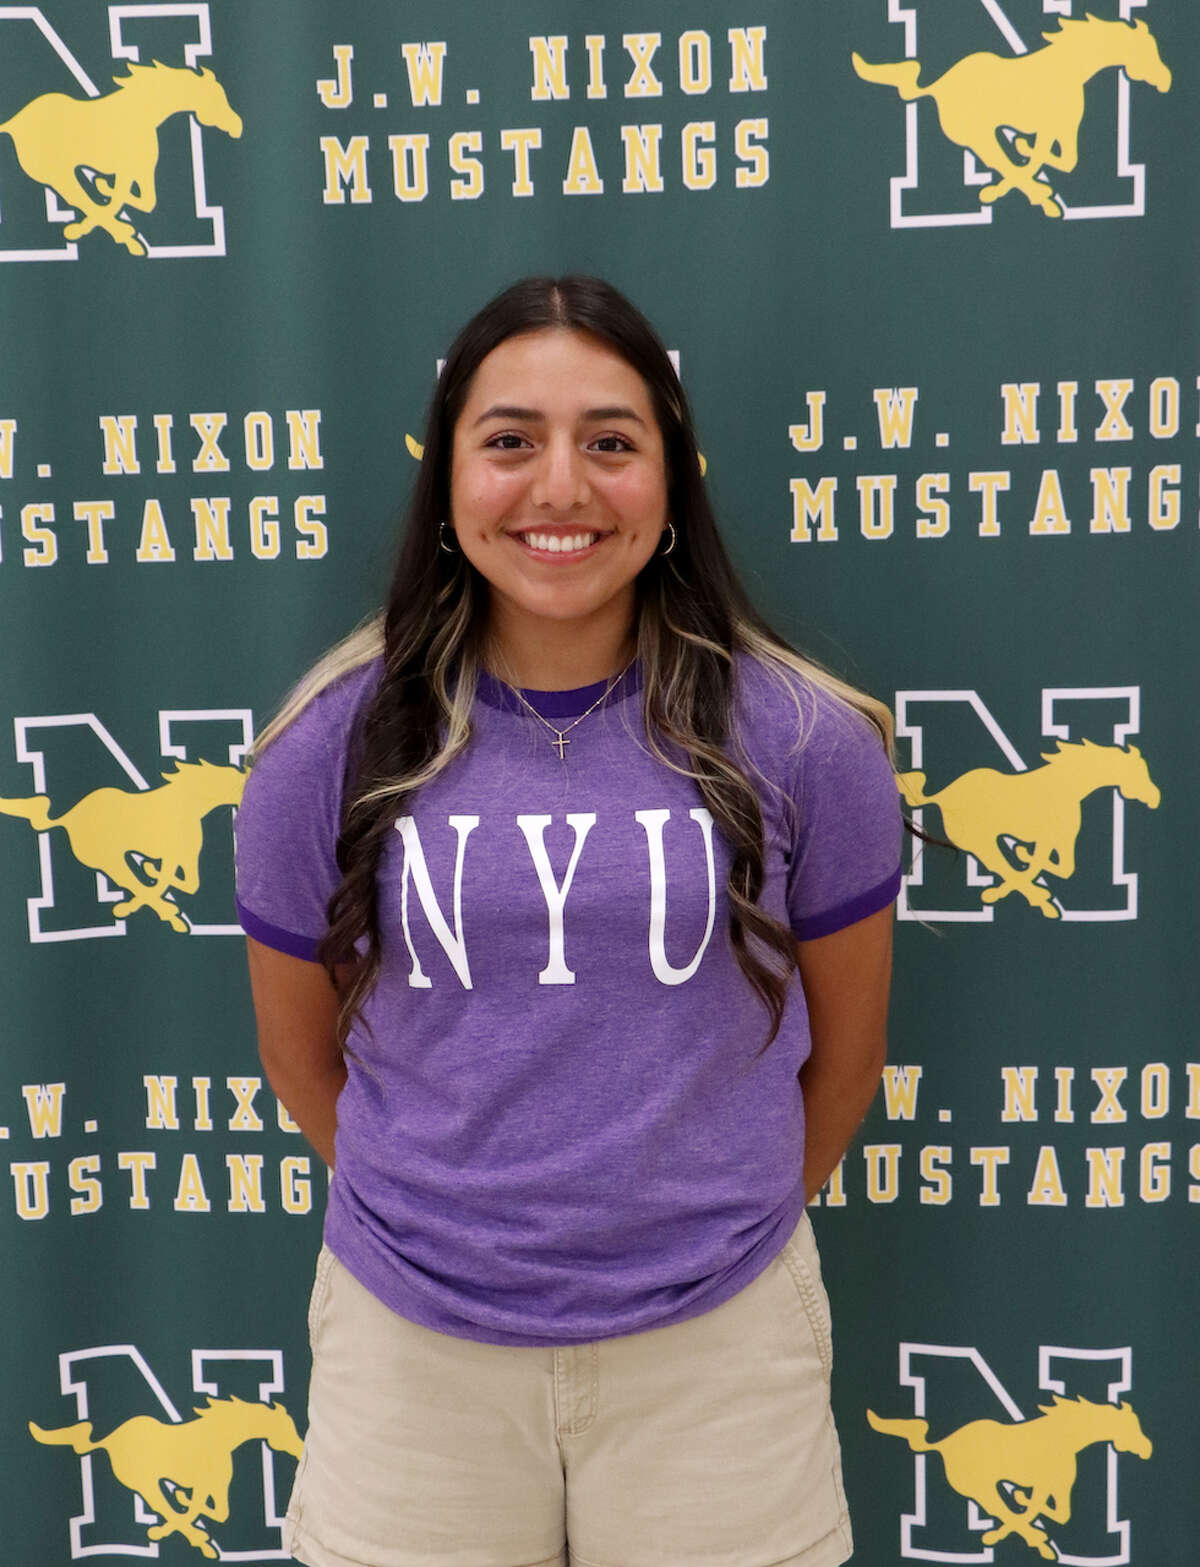 Nixon 2023 Valedictorian Natalie Tristan has been selected as a recipient of the NYU Stern Scholarship as she will attend NYU’s Stern School of Business on a four-year scholarship.